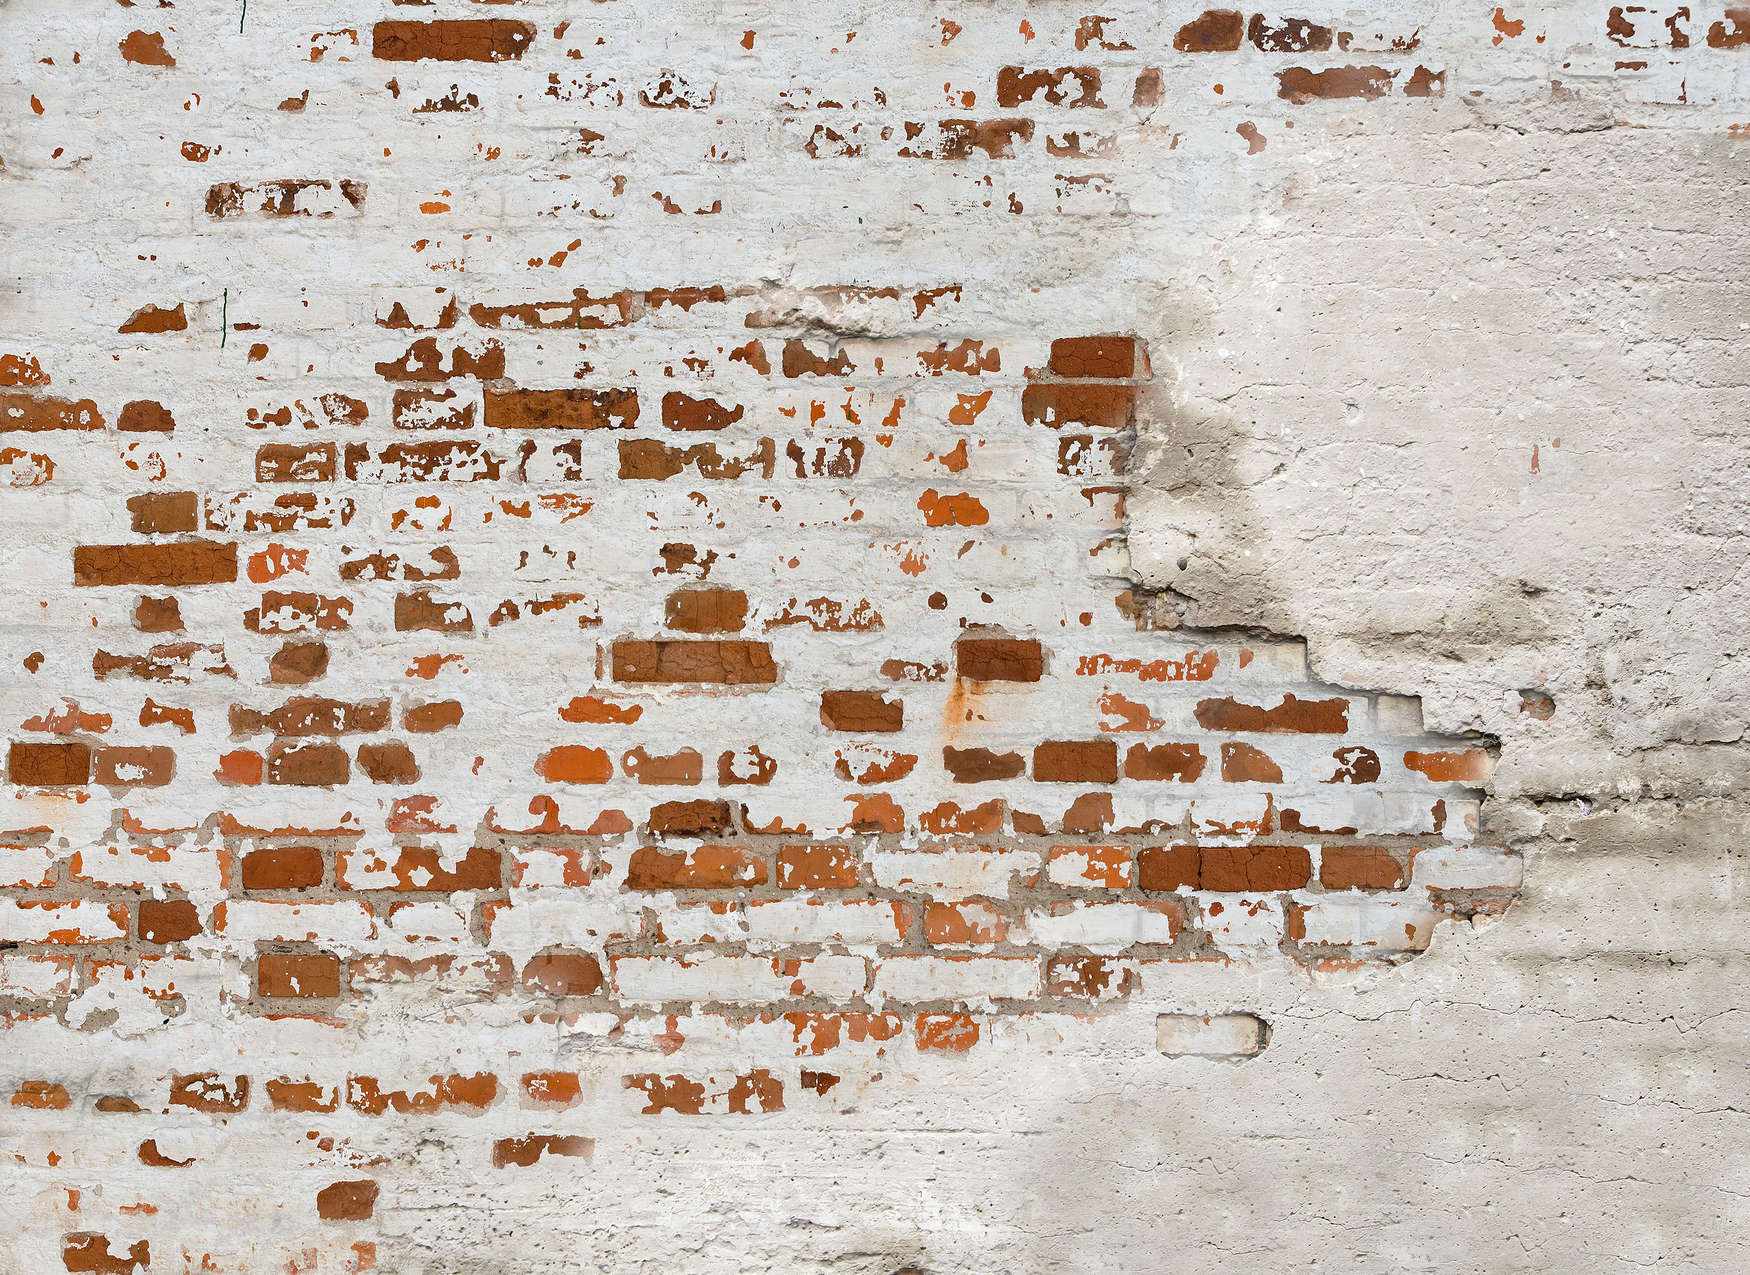             Photo wallpaper Brick Wall Plastered in 3D Industrial Style - Brown, Grey
        